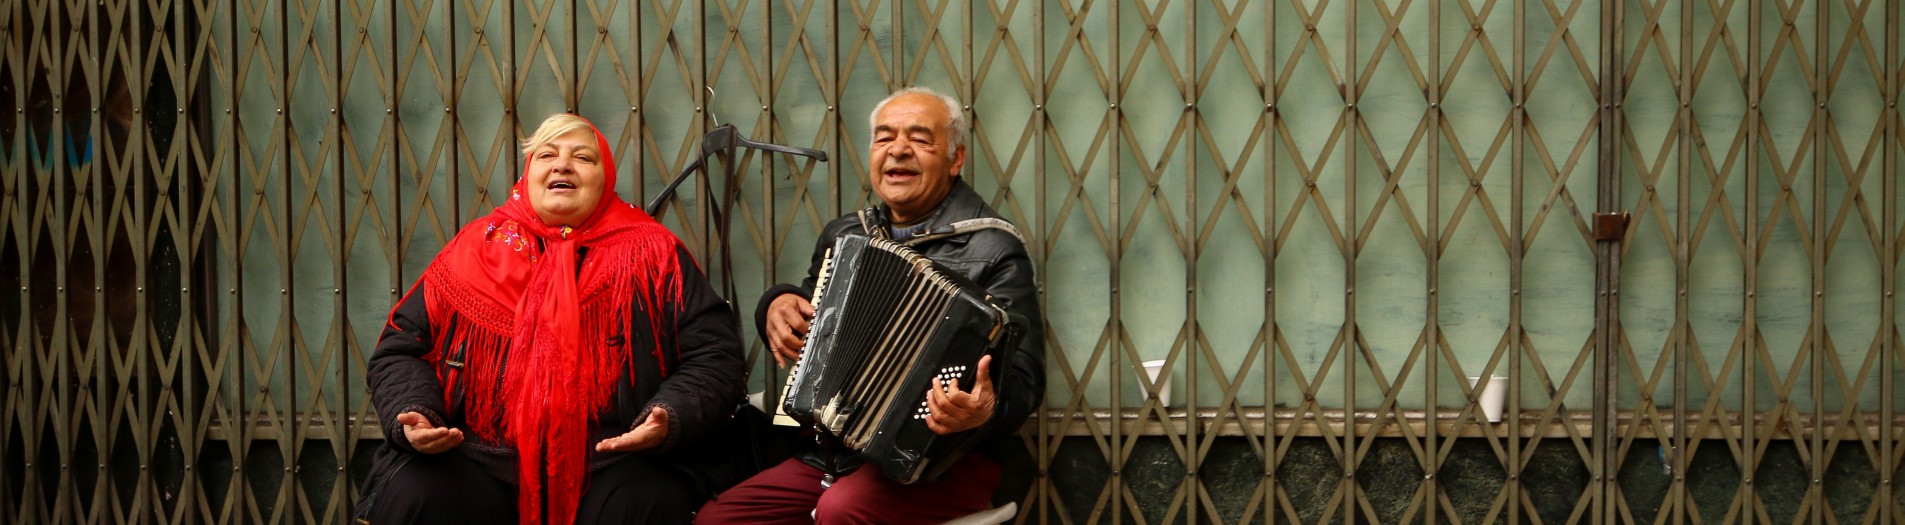 Buskers in Madrid